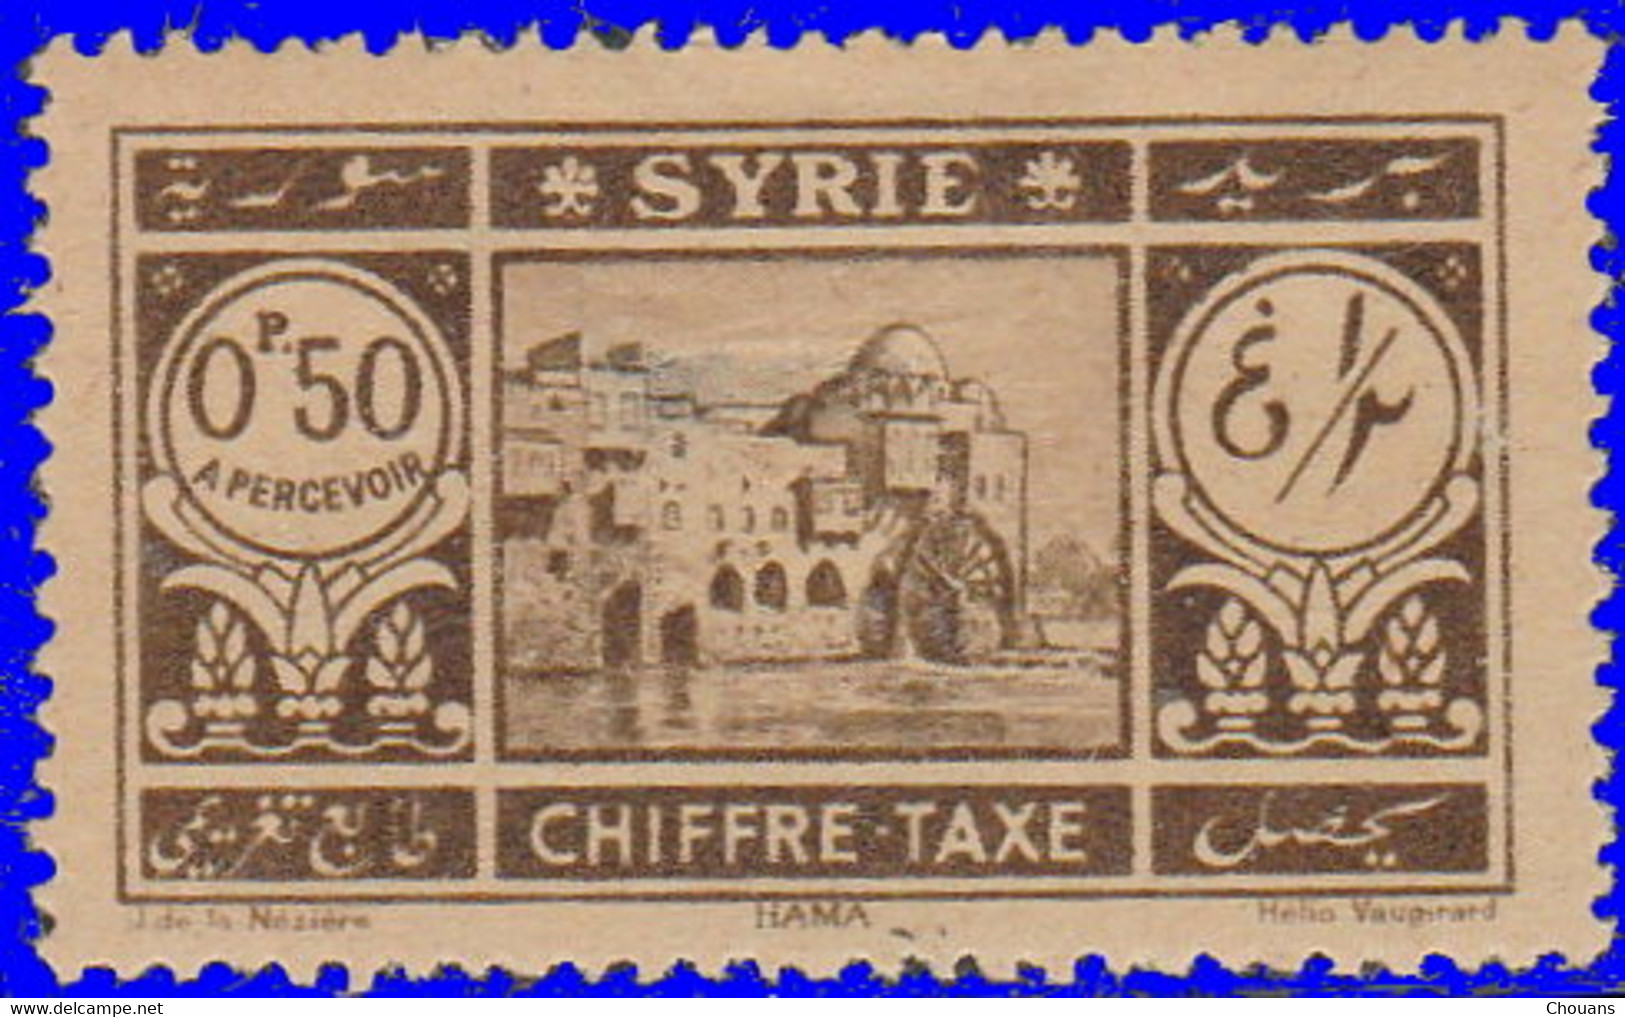 Syrie Taxe 1925. ~ T 32* - Hama - Postage Due